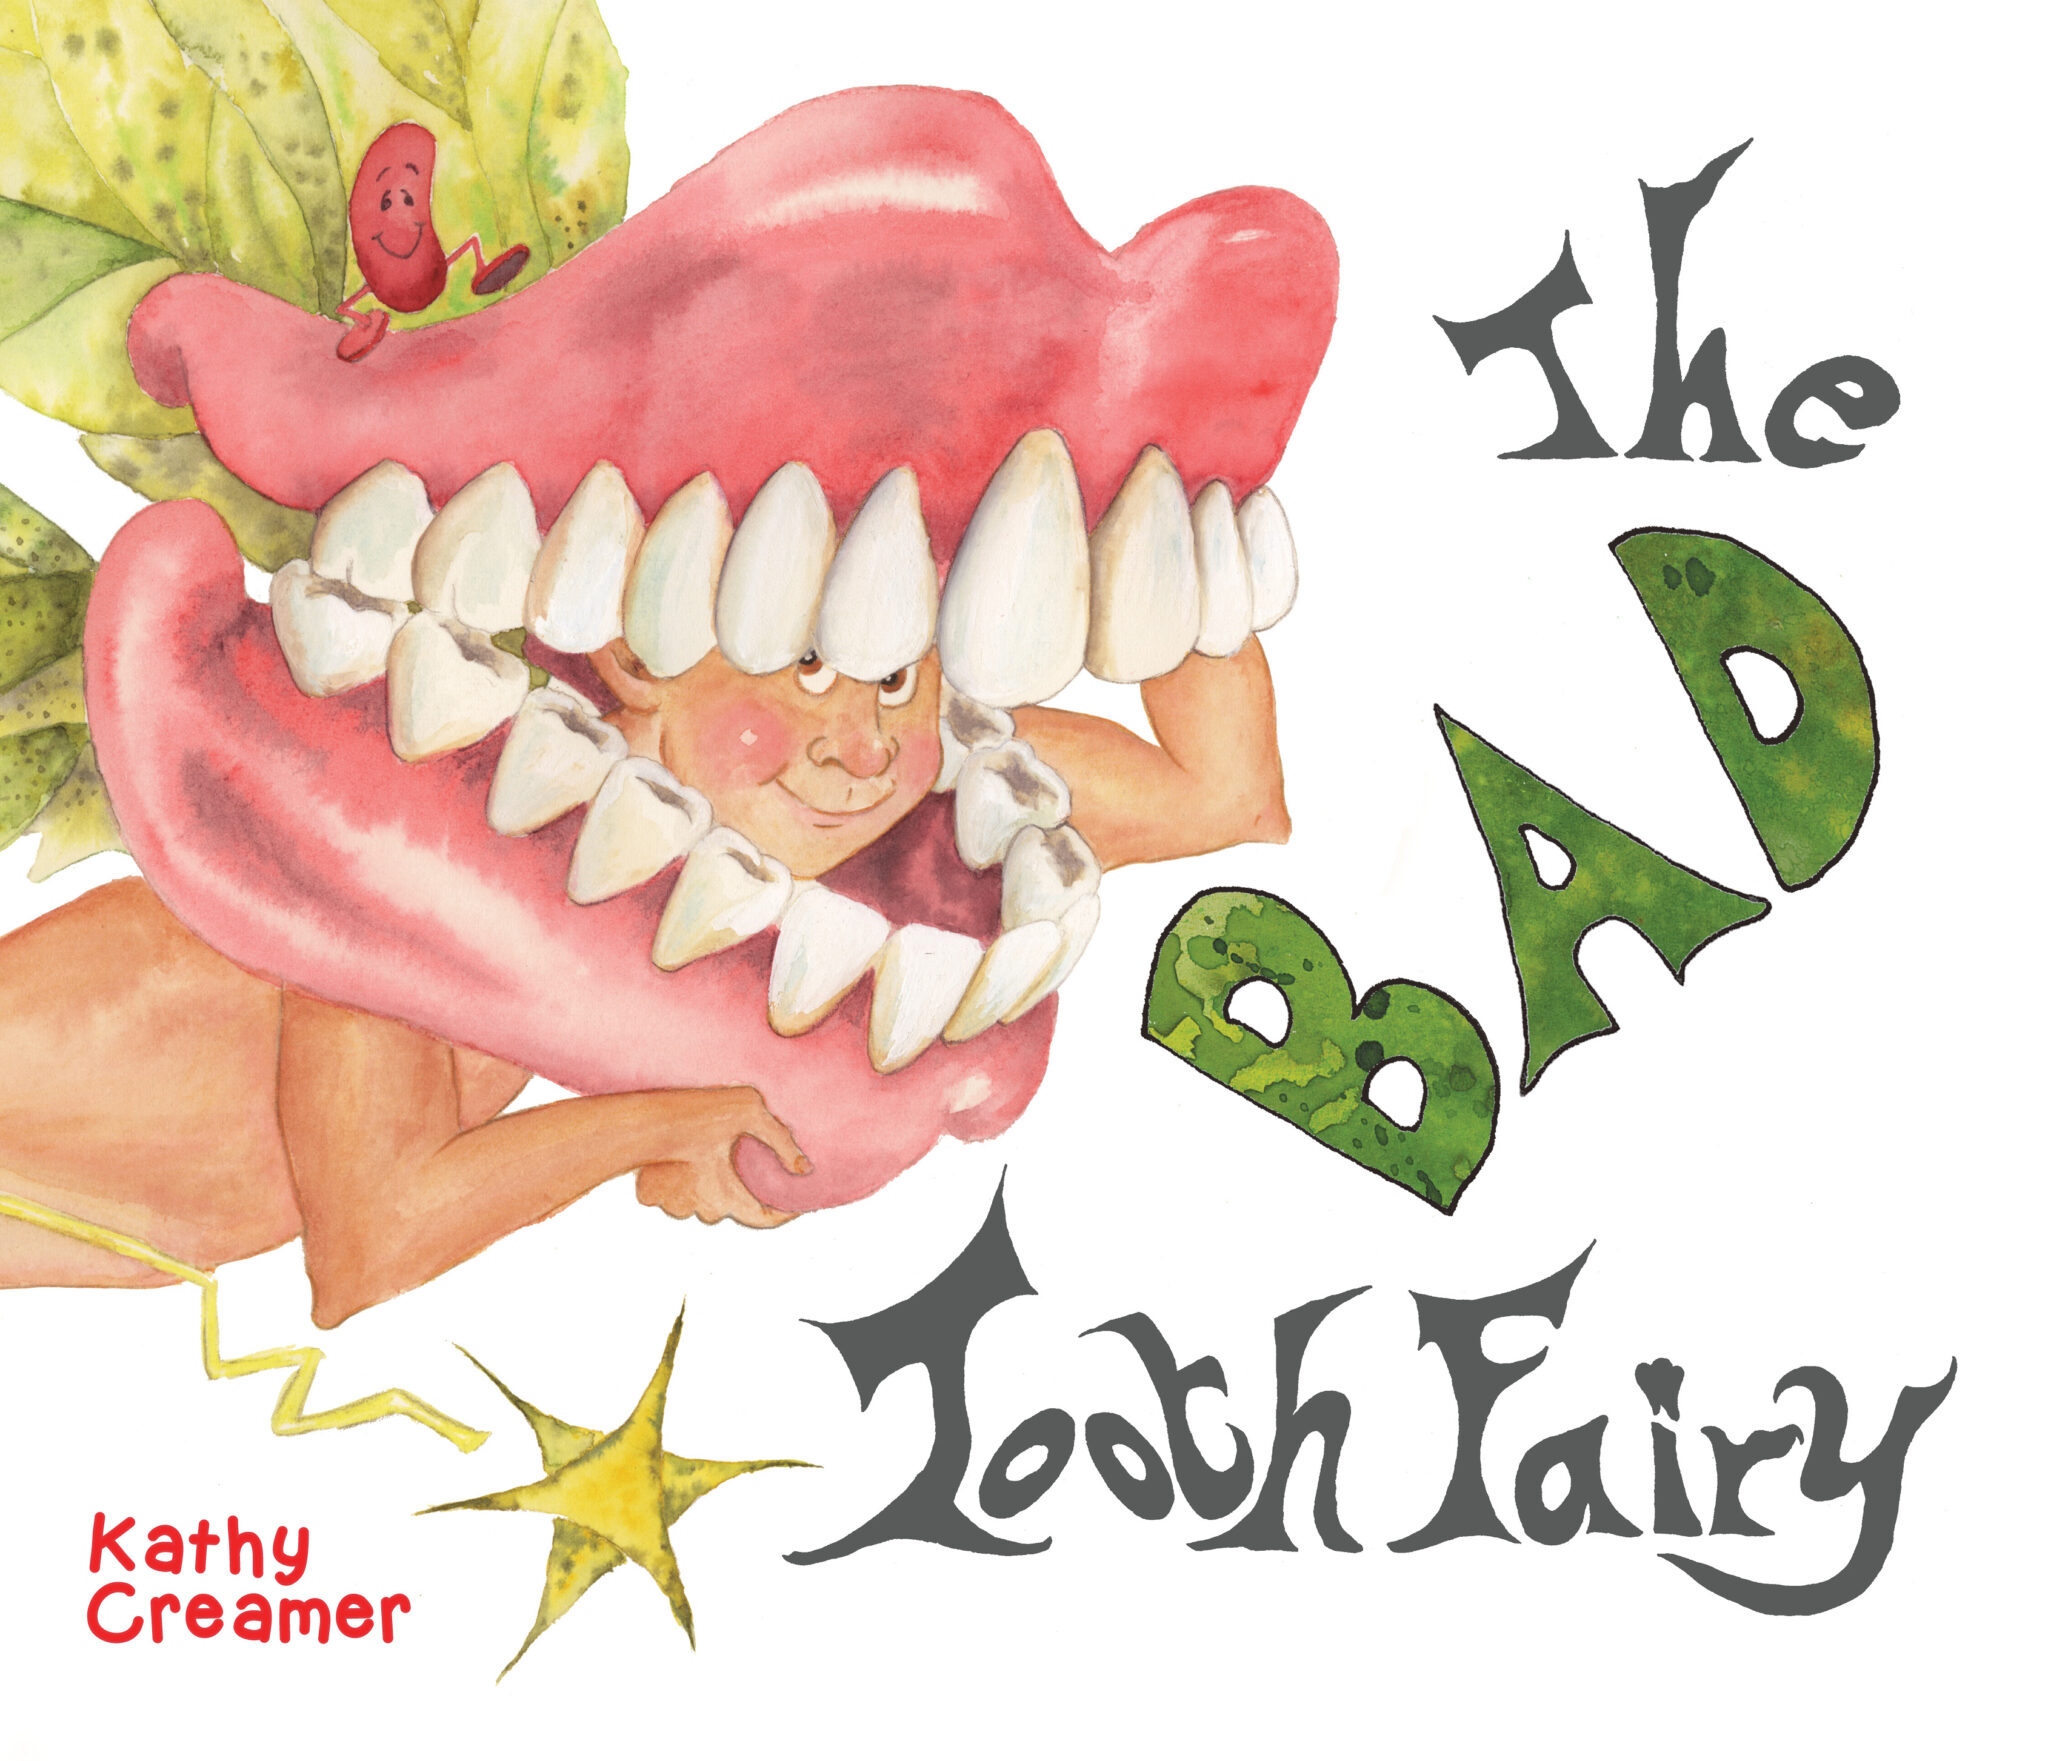 The Bad Tooth Fairy